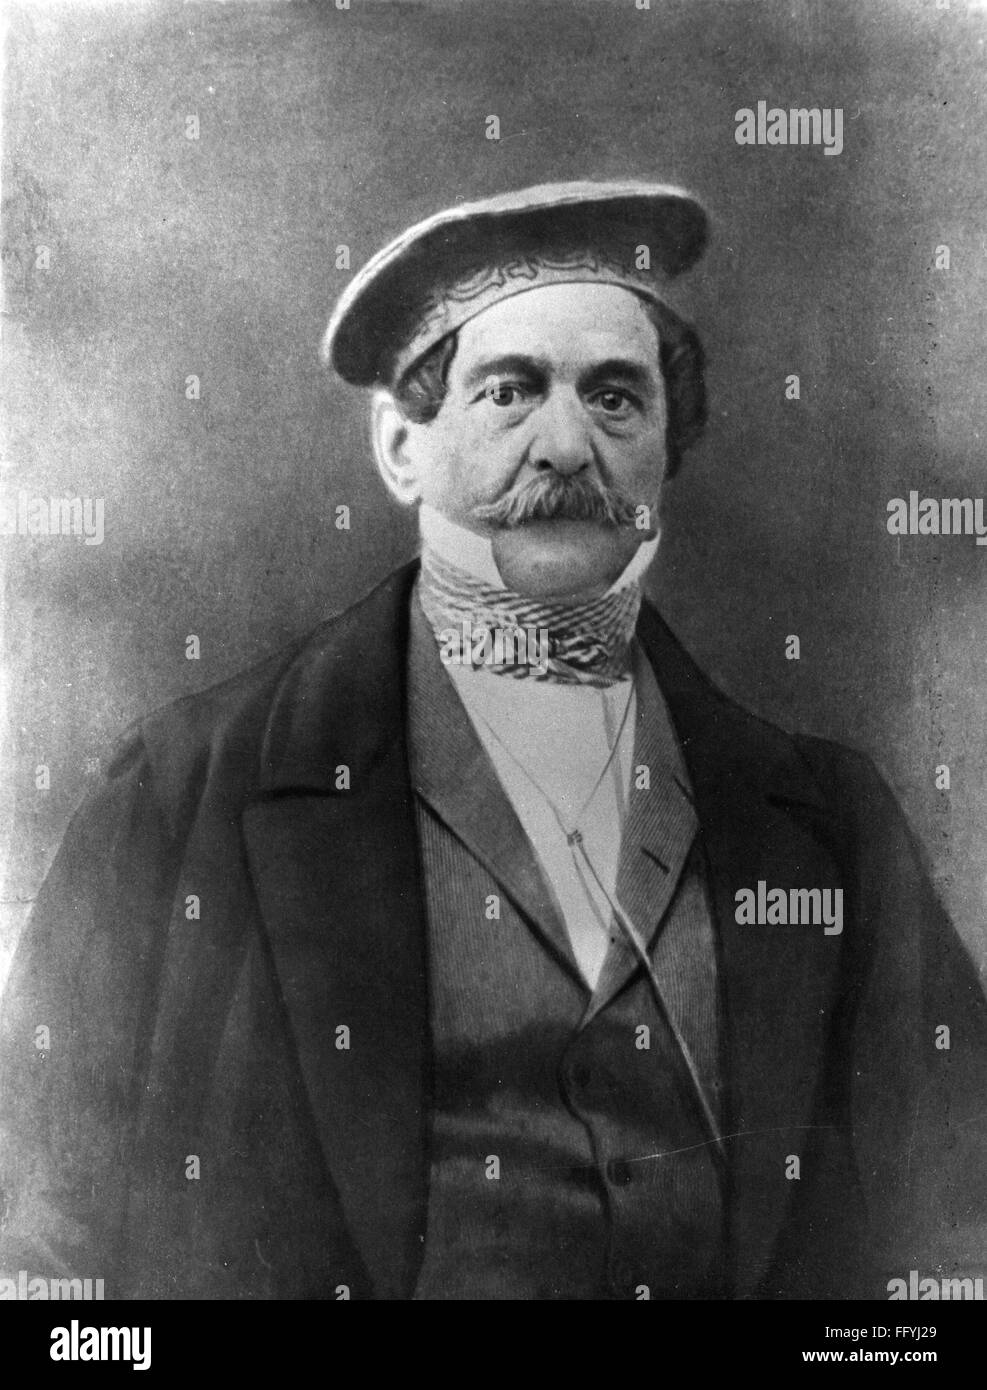 photography, early photograph, half length of a man, Atelier Löcherer, Munich, 19th century, 19th century, Alois Löcherer (1815 - 1862), half length, cap, caps, moustache, mustache, moustaches, mustaches, clothes, outfit, outfits, jacket, jackets, waistcoat, waistcoats, vest, cravat, cravats, tie, ties, headpiece, headpieces, photograph, photo, photographs, historic, historical, Loecherer, Löcherer, Locherer, man, men, male, people, Additional-Rights-Clearences-Not Available Stock Photo